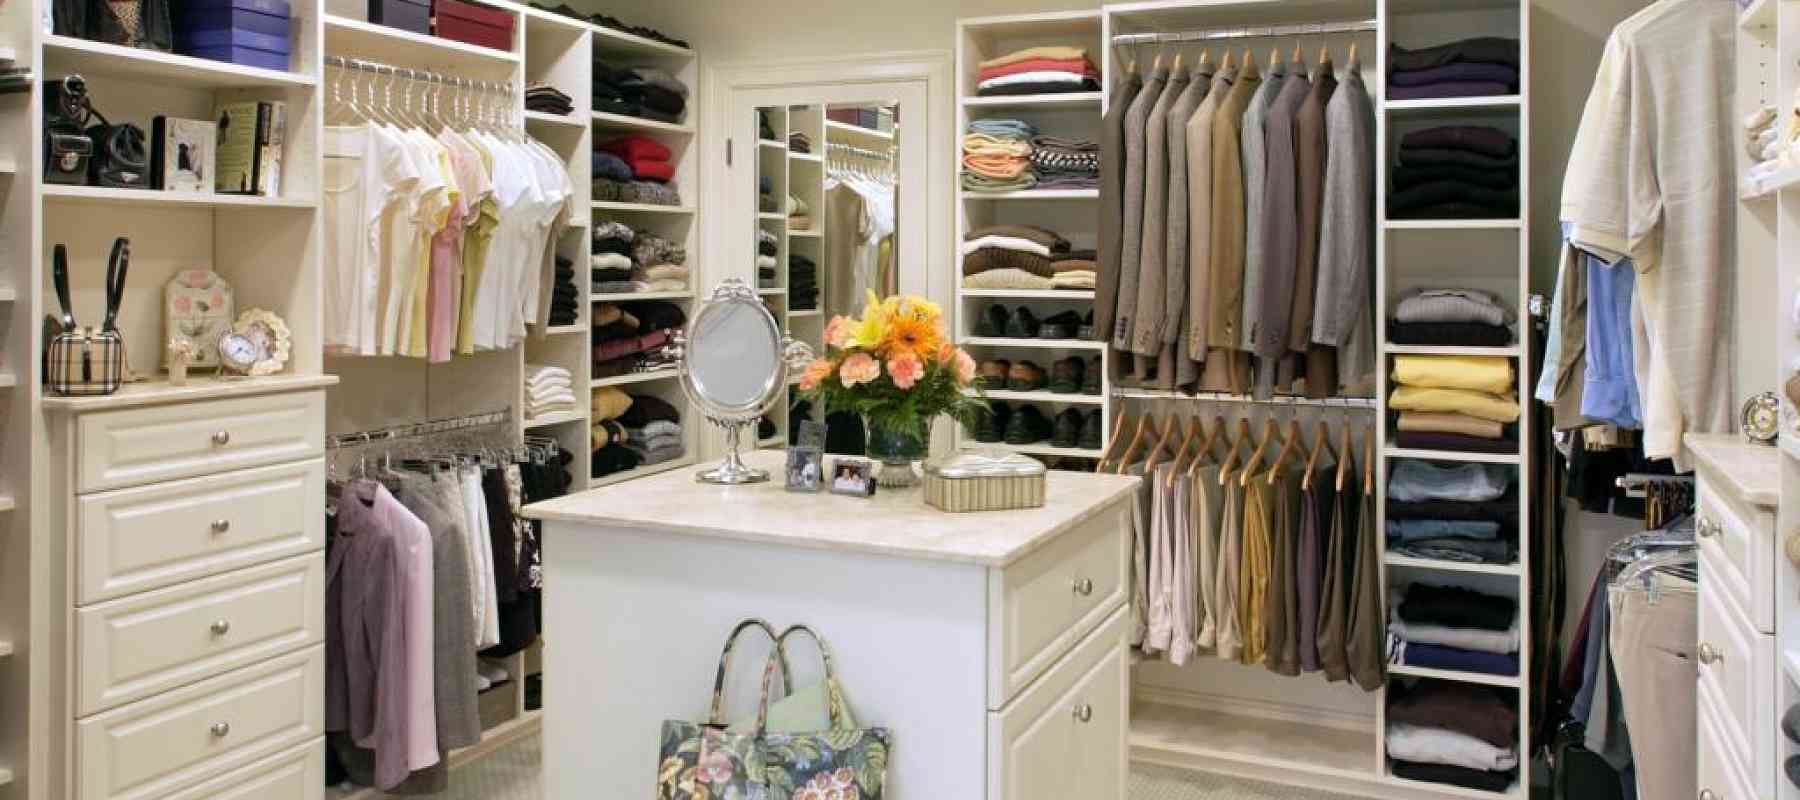 Four ways to clean and organize your closets